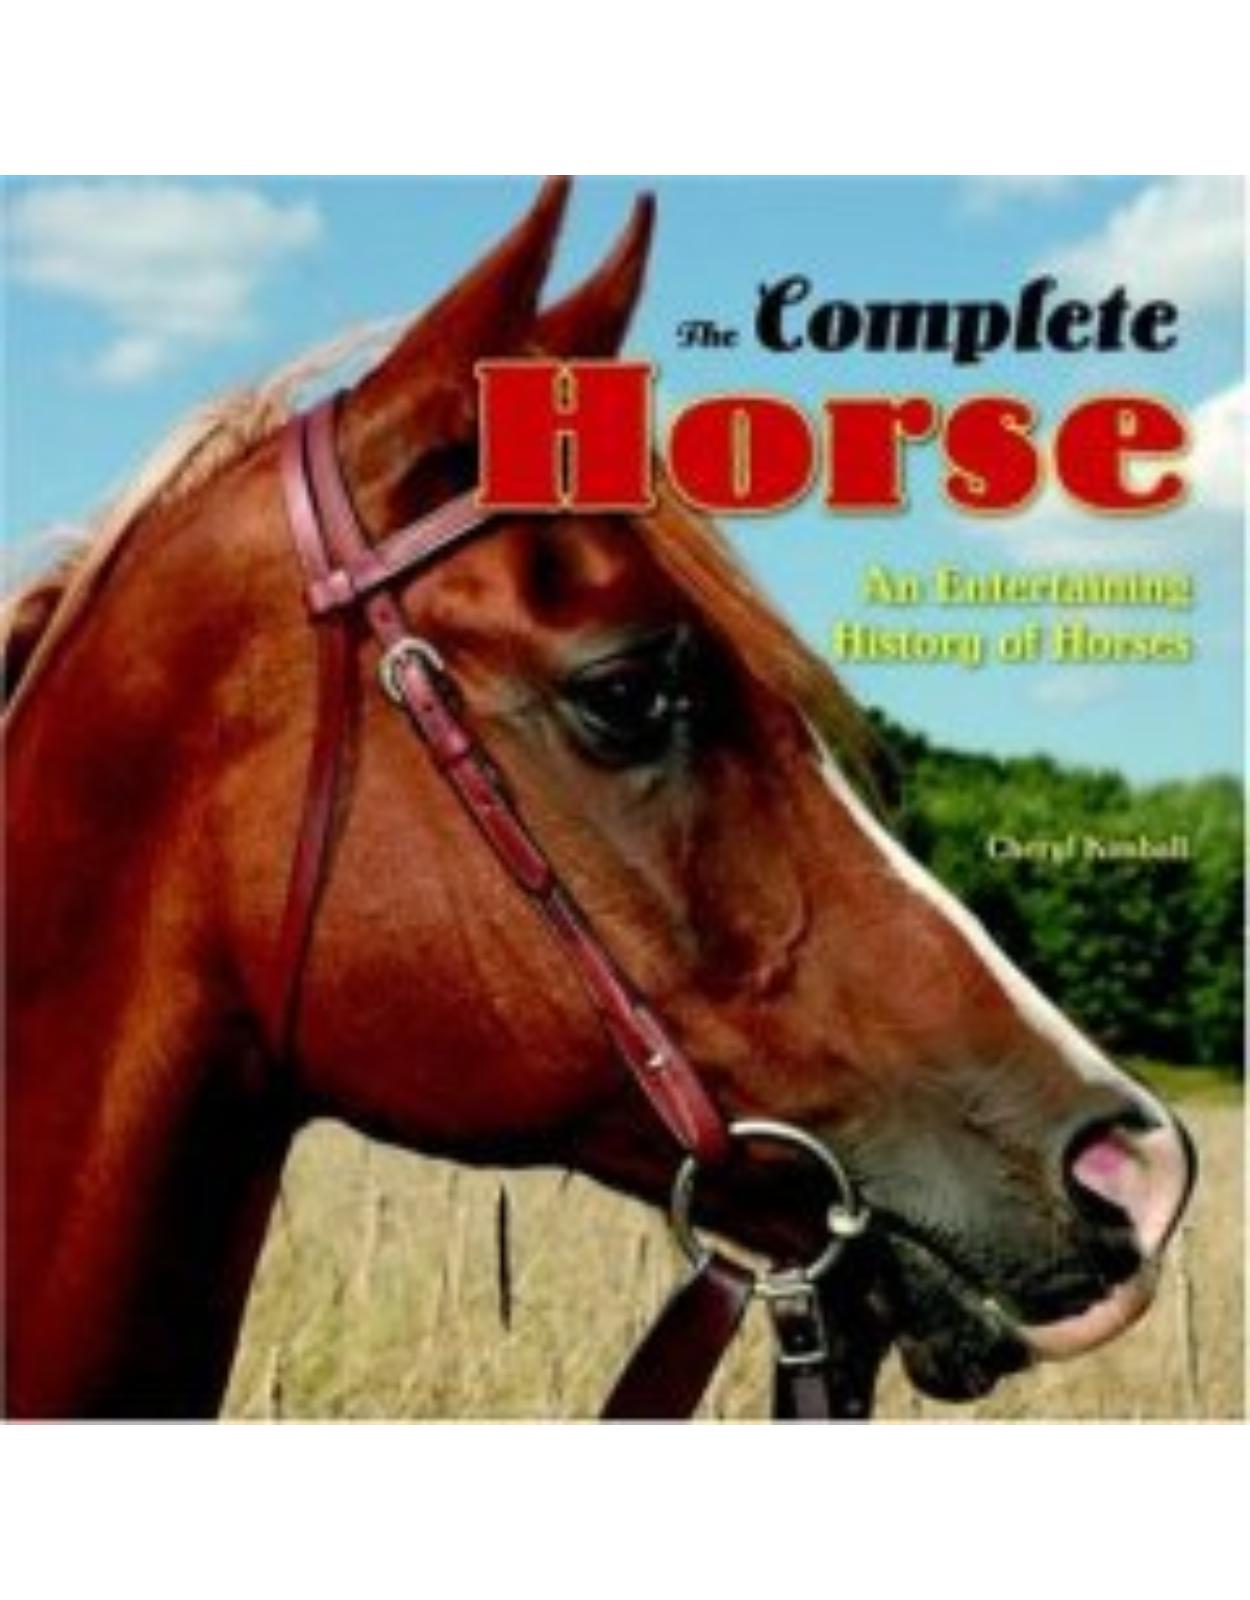 The Complete Horse